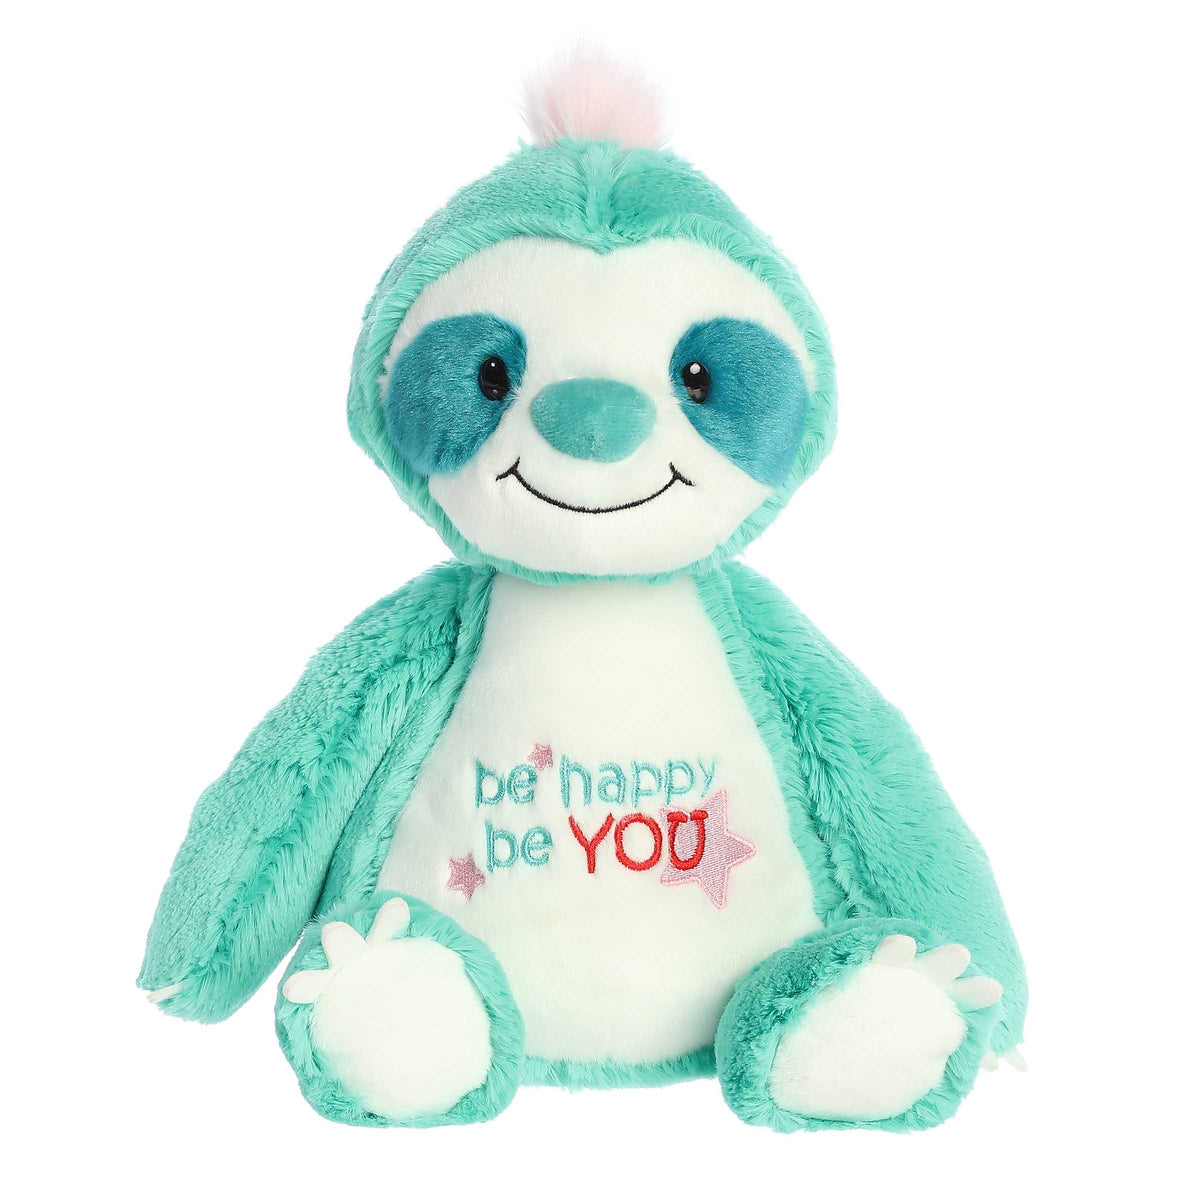 Cute quirky sloth plush toy with a white body and bright blue fur, smiling face, and a "be happy, be YOU" pun written across